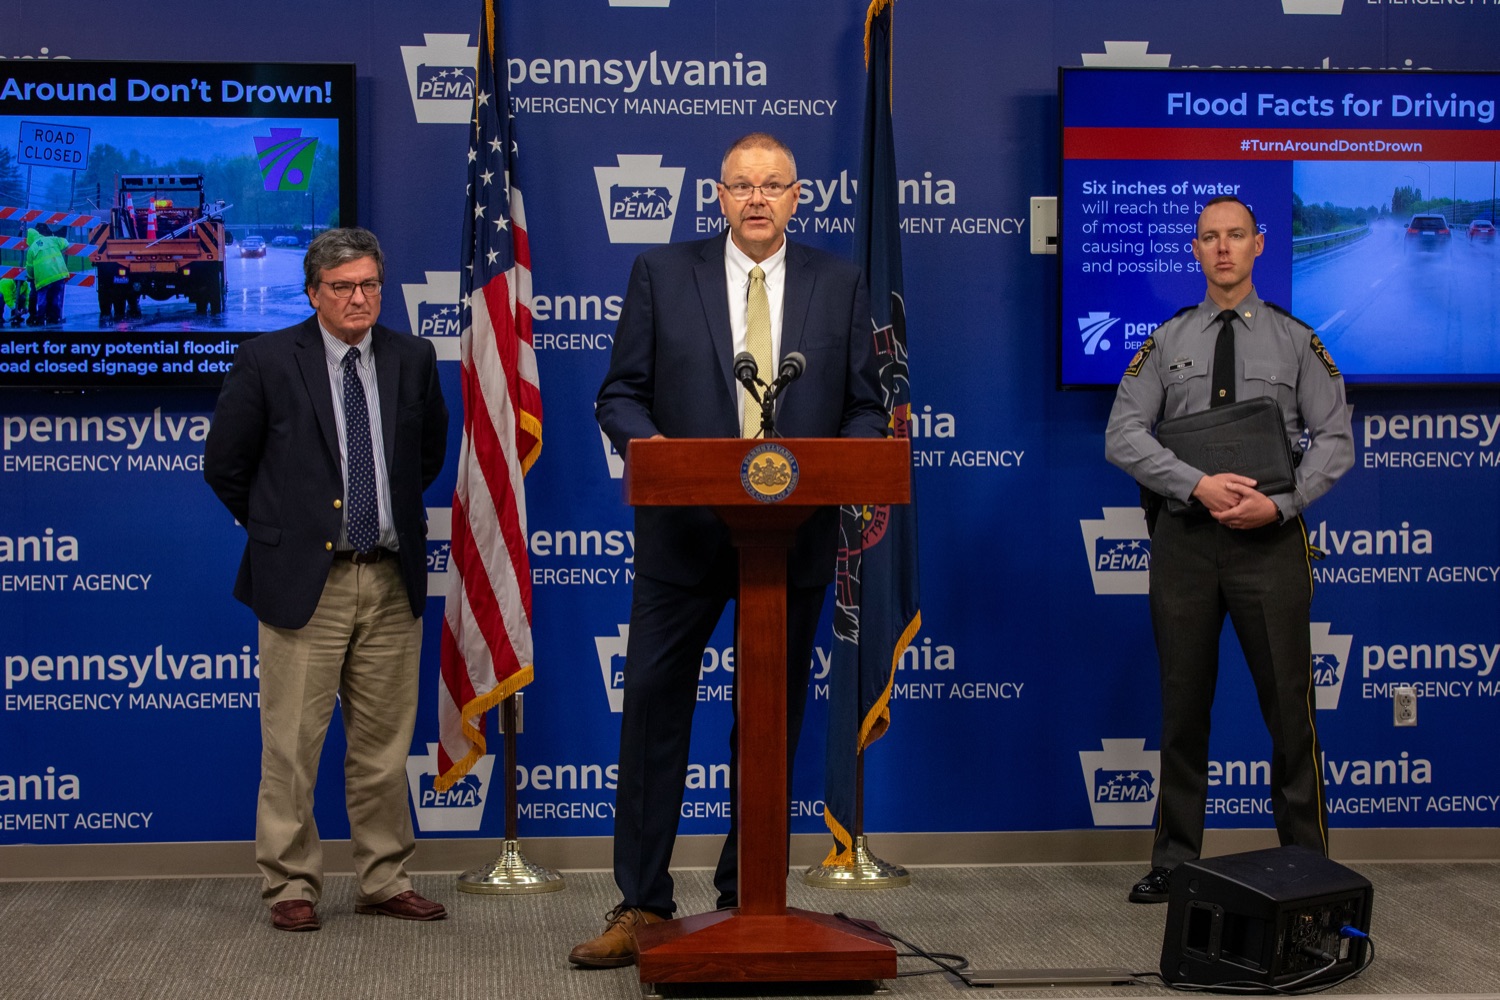 PEMA director, David 'Randy' Padfield speaks at a joint press conference urging motorists to never drive through flooded roadways..<br><a href="https://filesource.amperwave.net/commonwealthofpa/photo/23768_dot_flooding_sc_04.jpg" target="_blank">⇣ Download Photo</a>